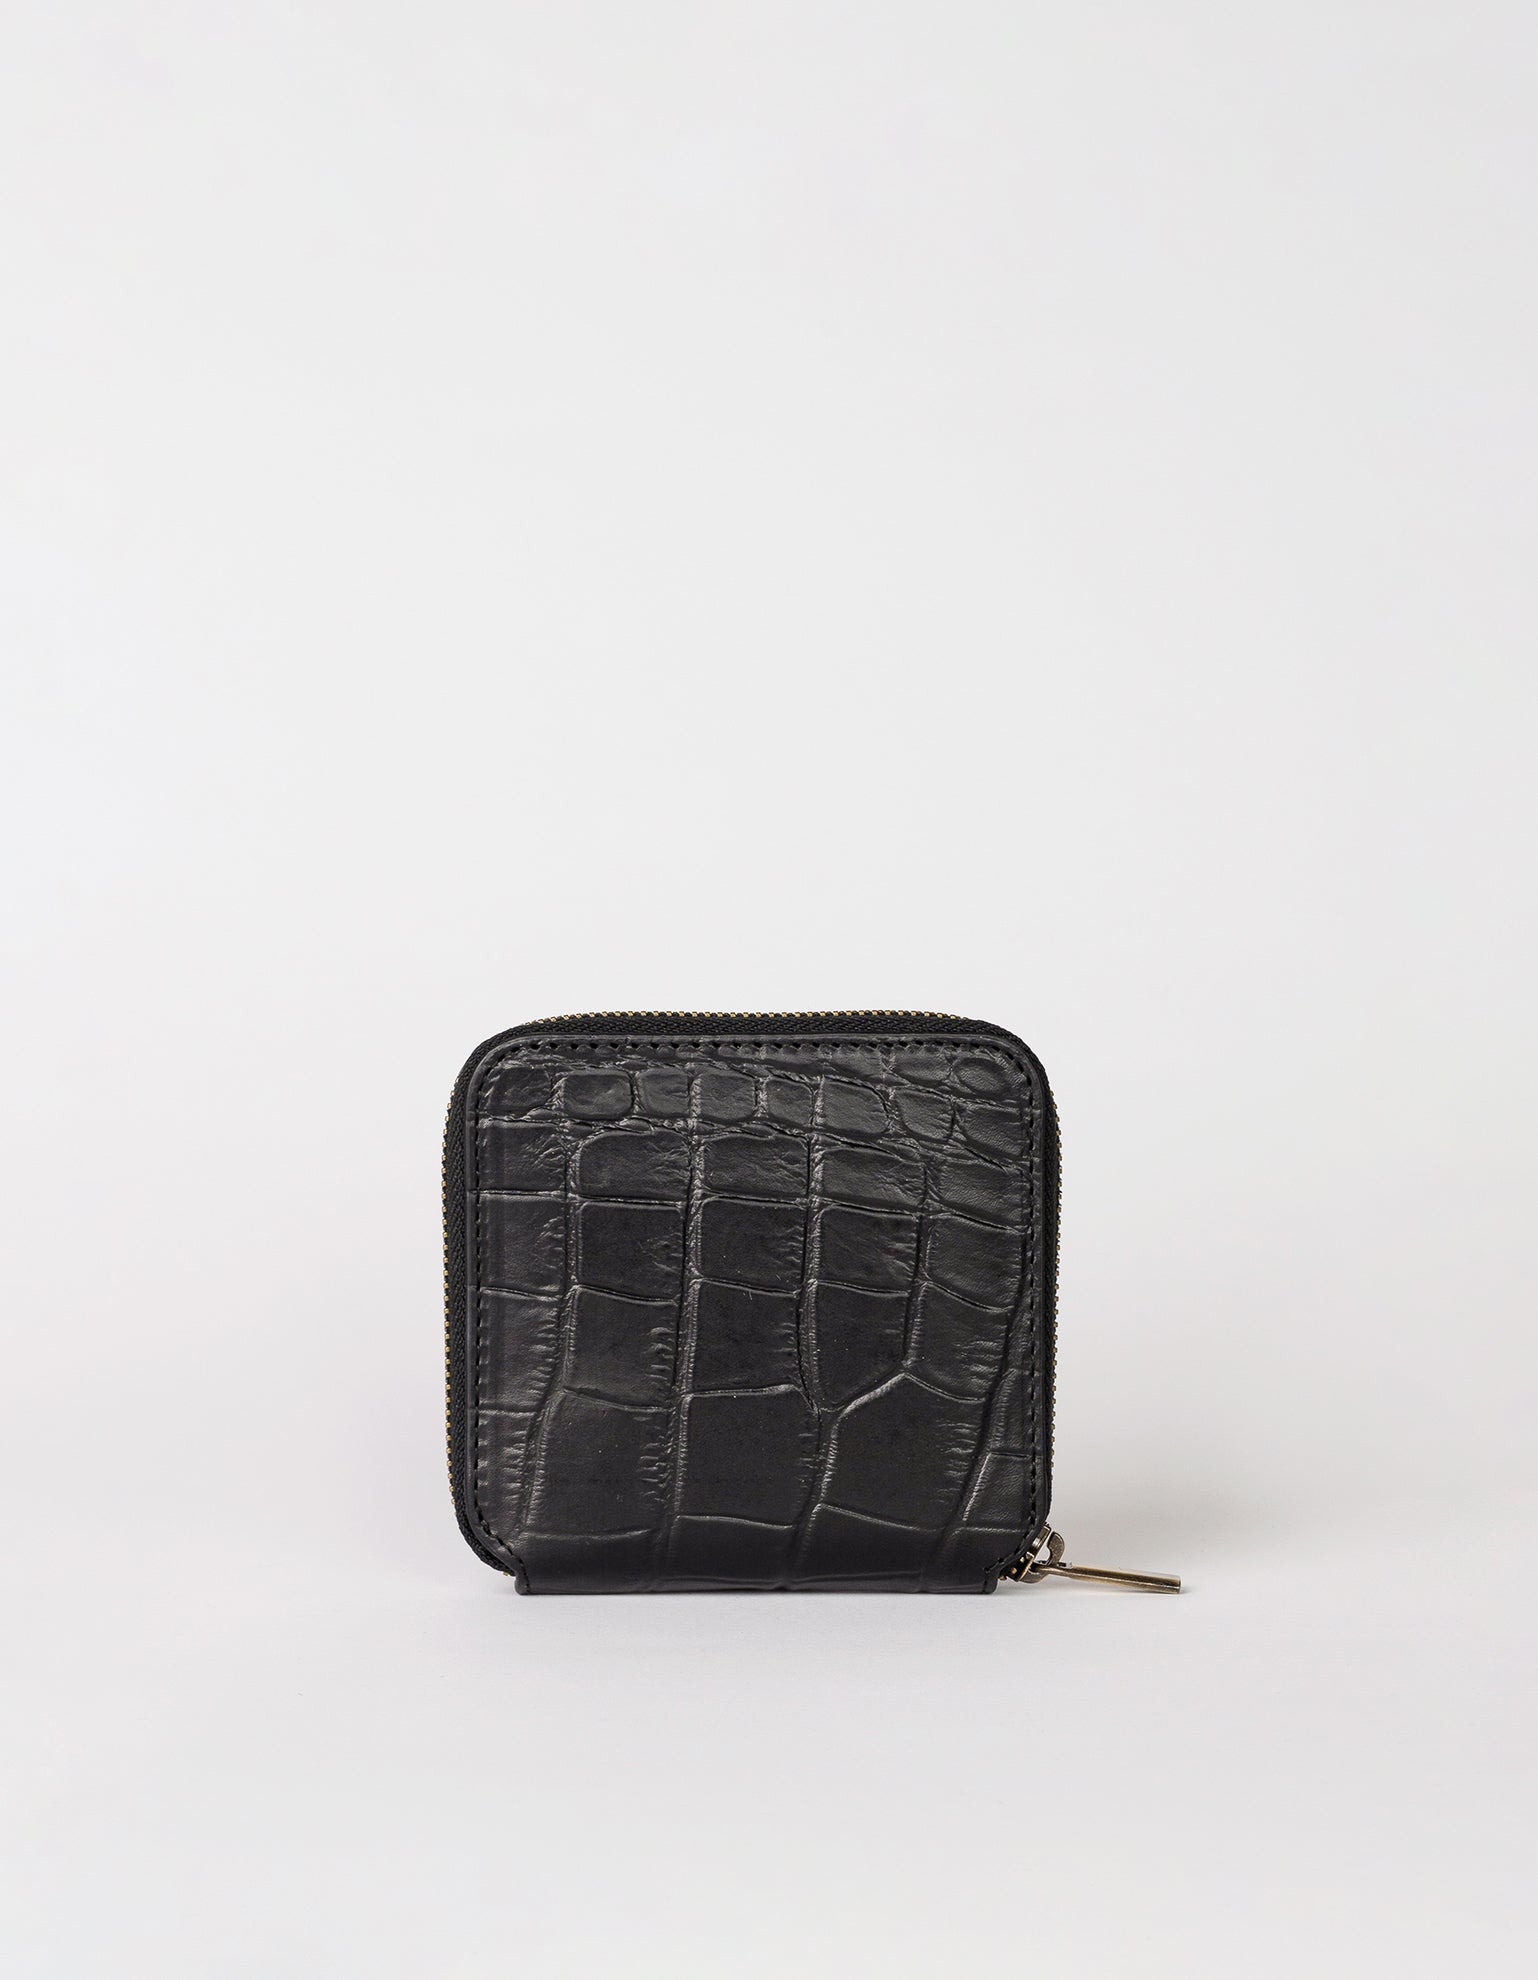 Sonny Square Wallet Black Classic Croco Leather. Back image